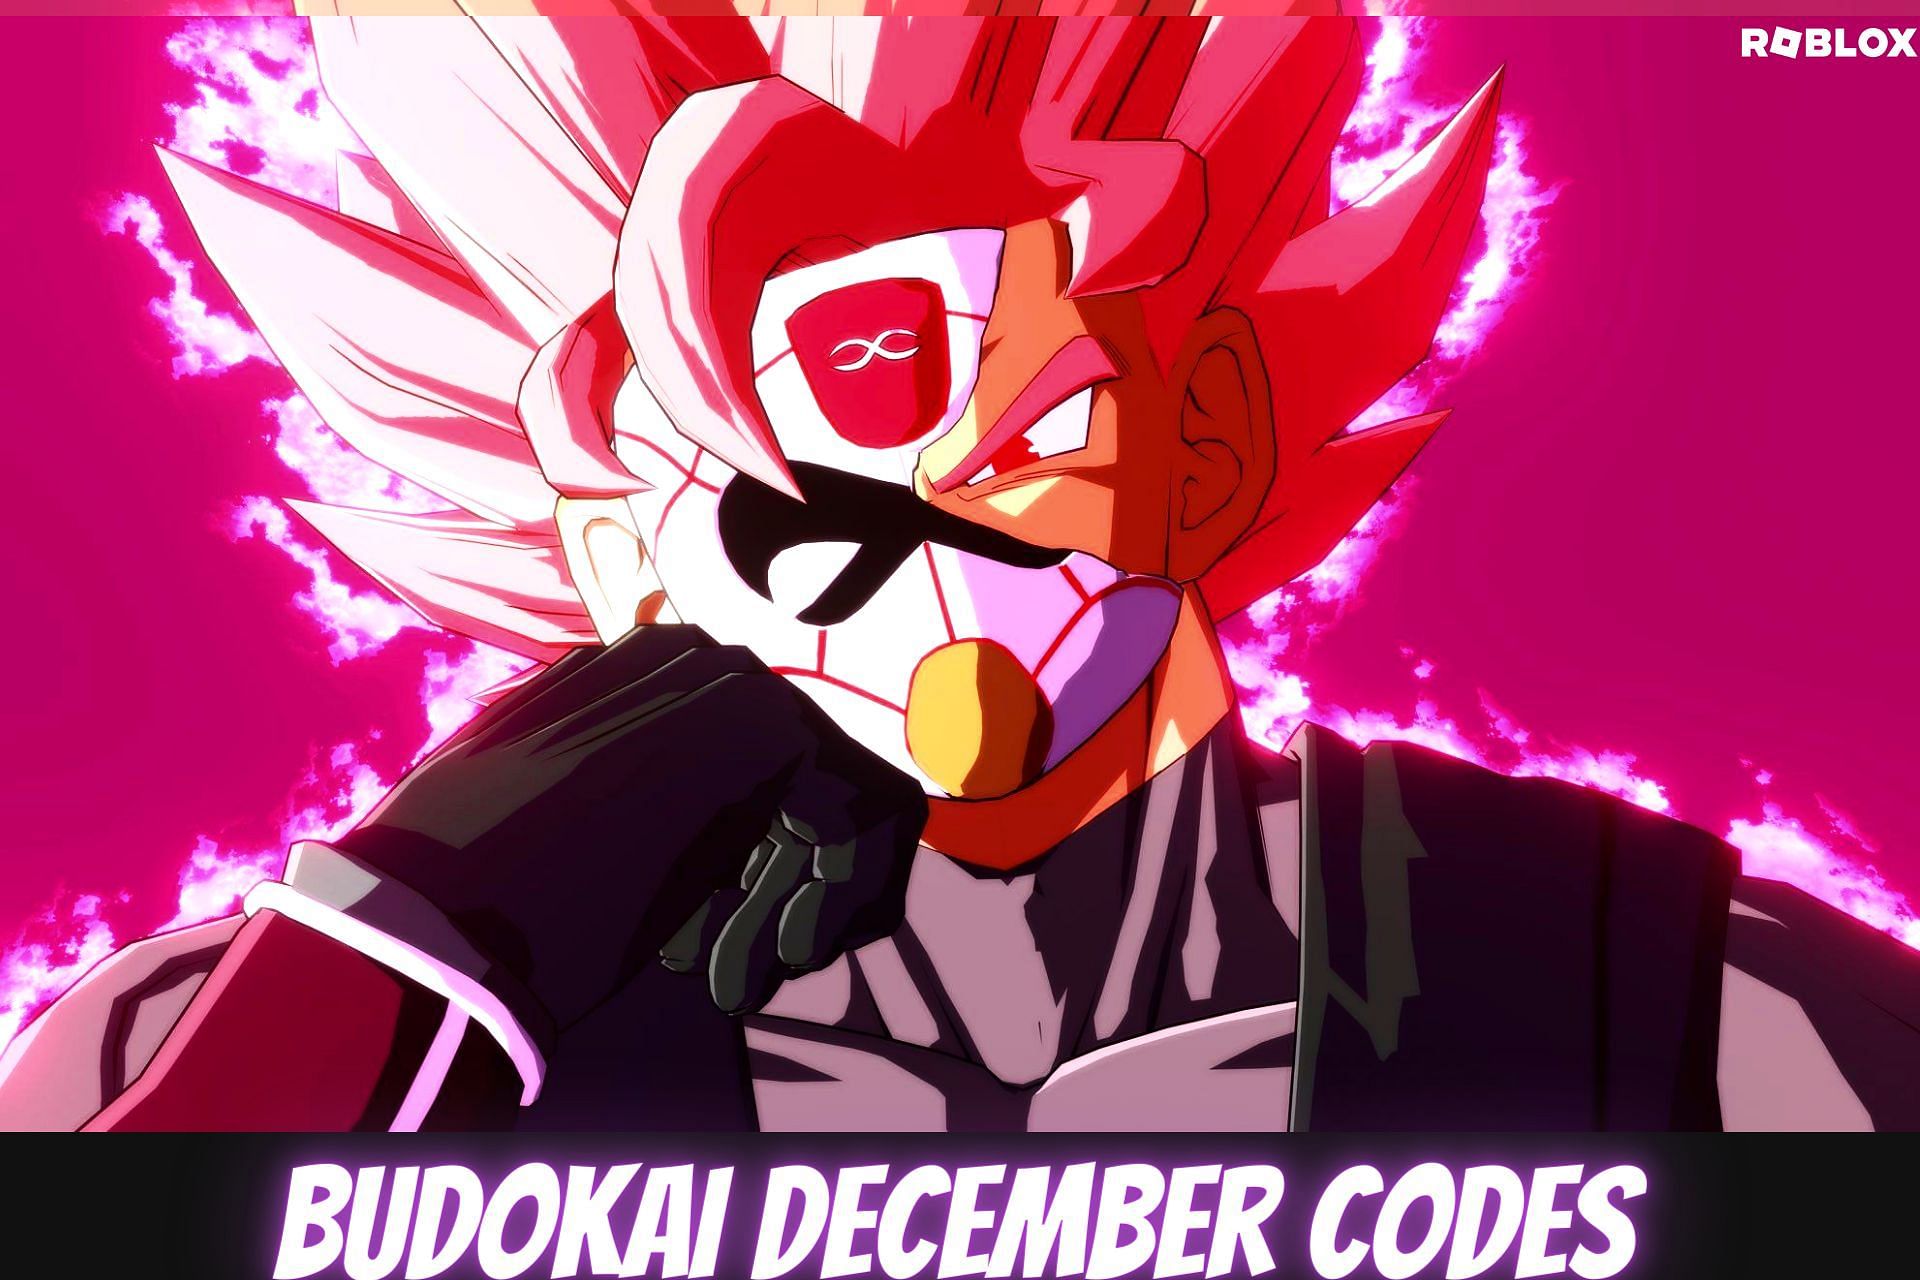 Budokai codes in Roblox: Free spins, rolls, and more (November 2022)